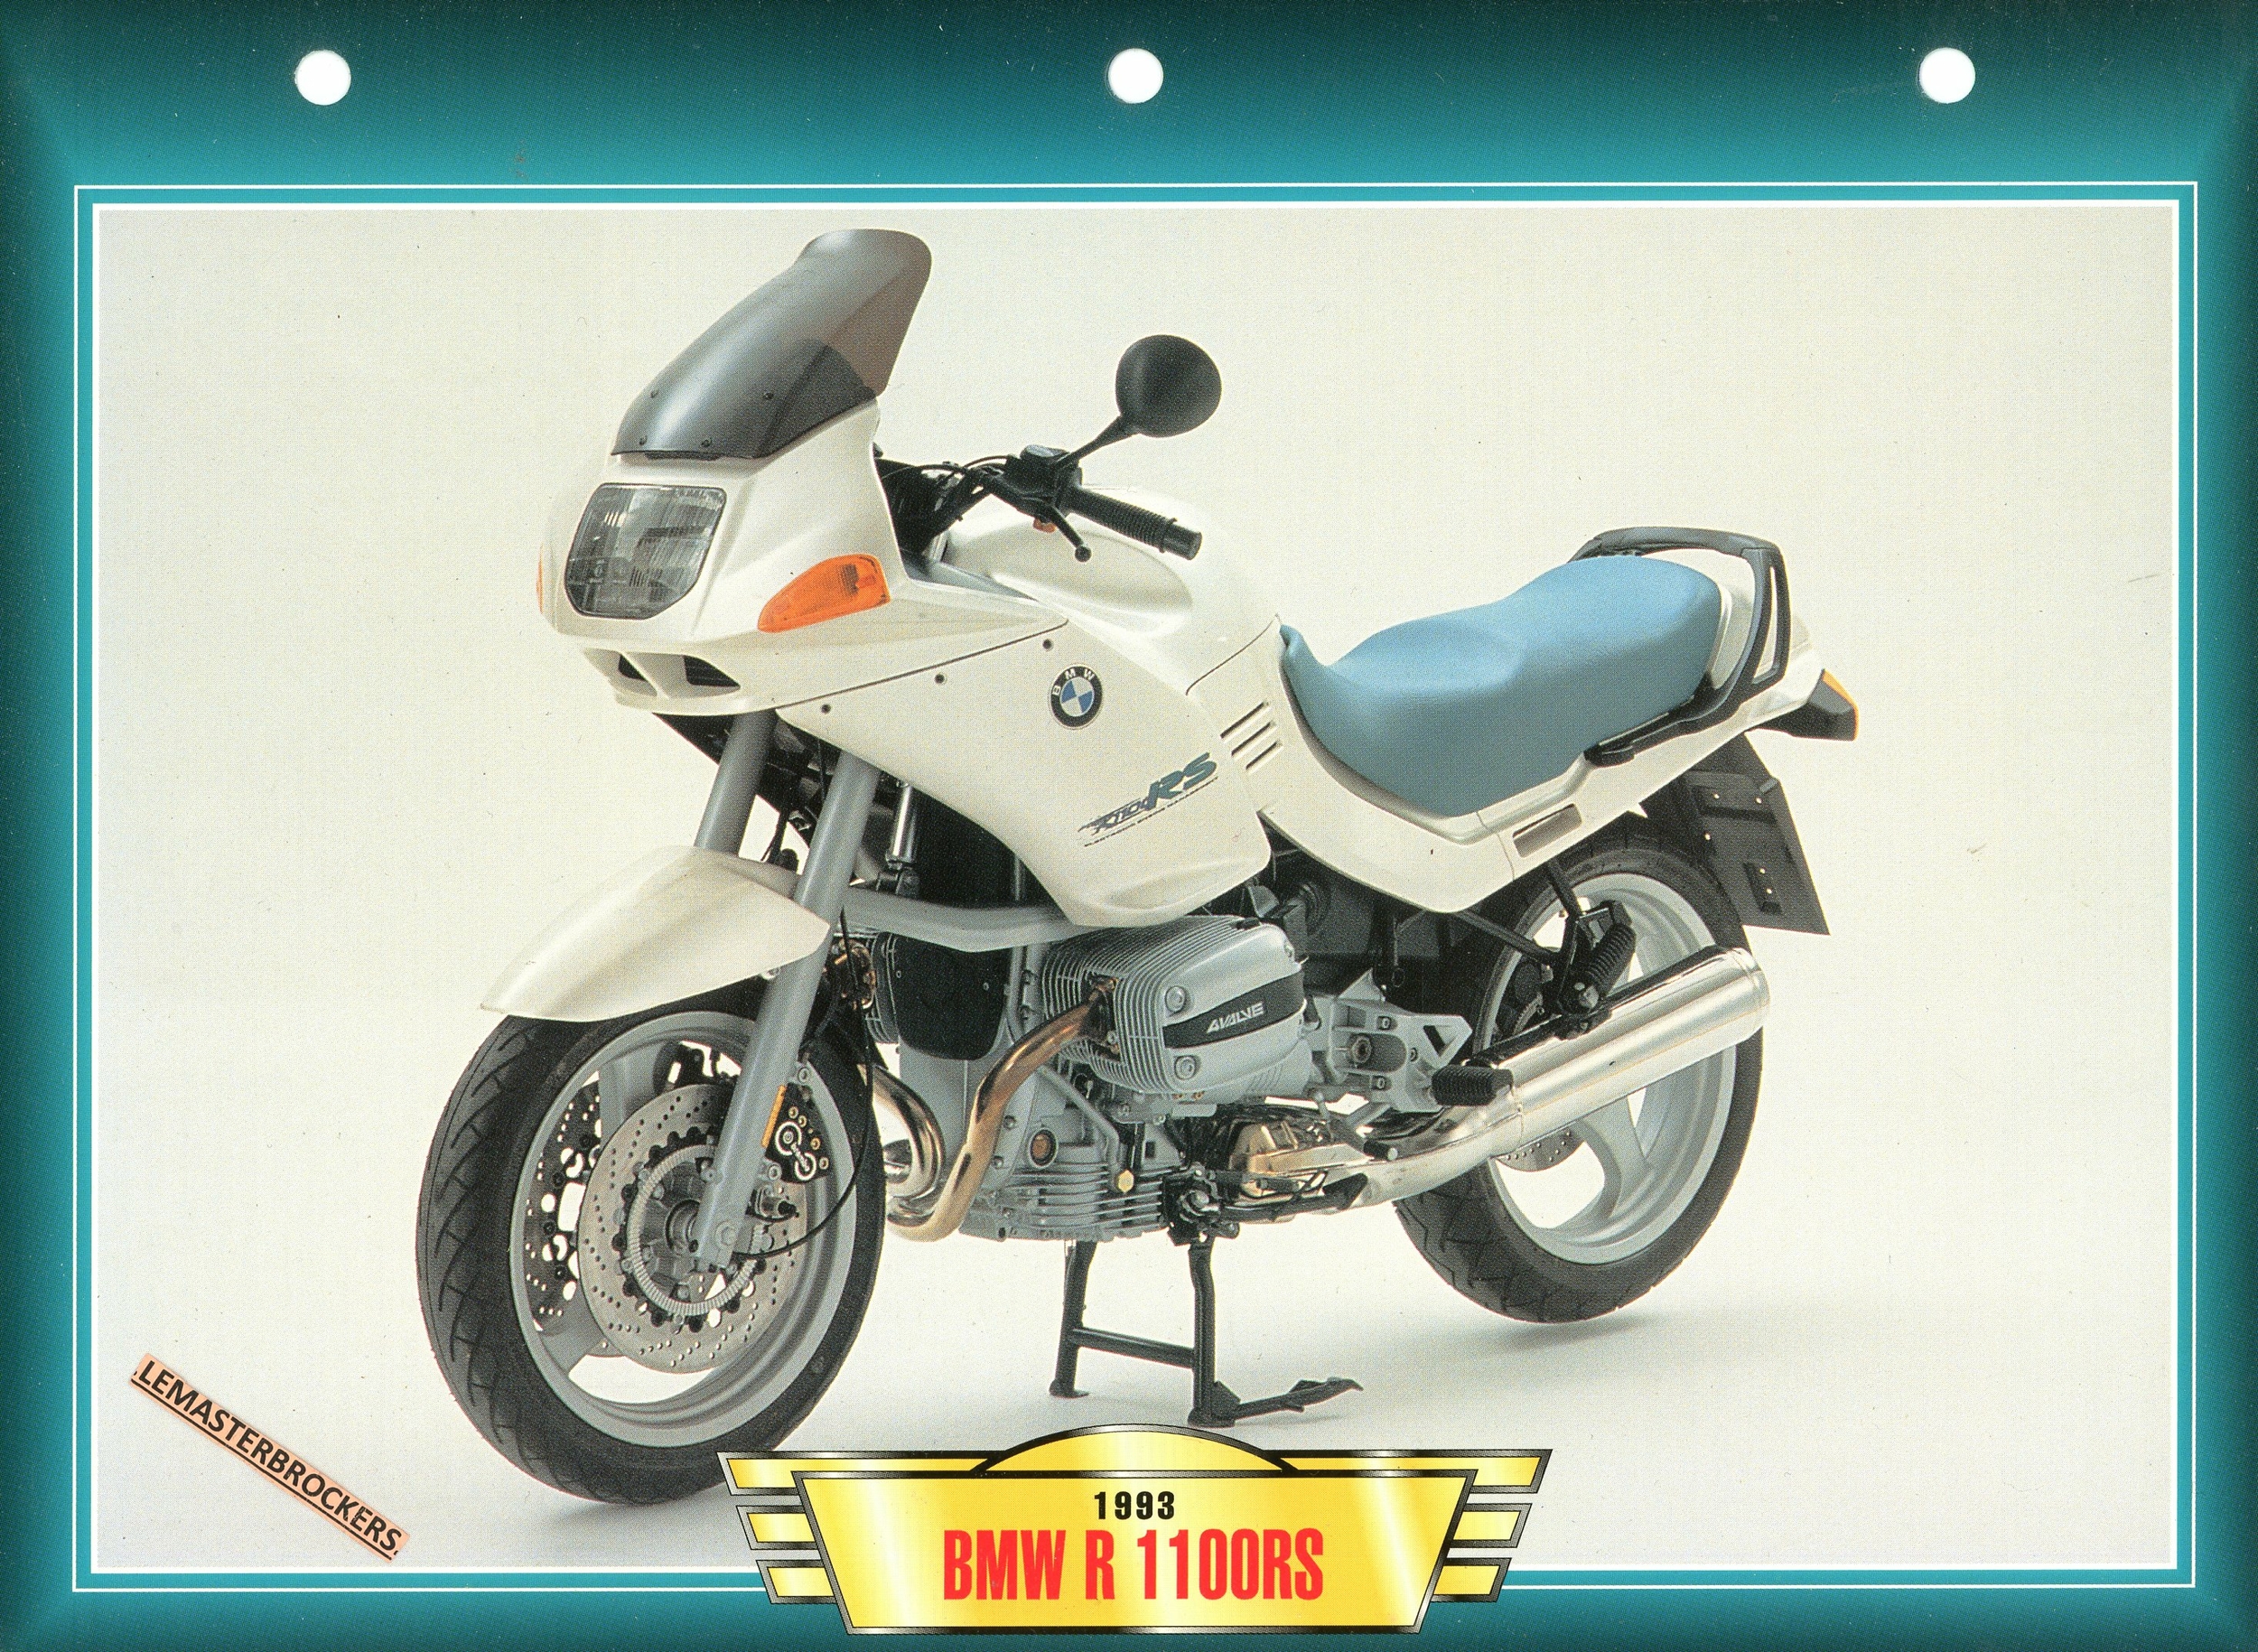 FICHE-MOTO-BMW-R1100RS-1993-LEMASTERBROCKERS-CARS-MOTORCYCLES-ATLAS